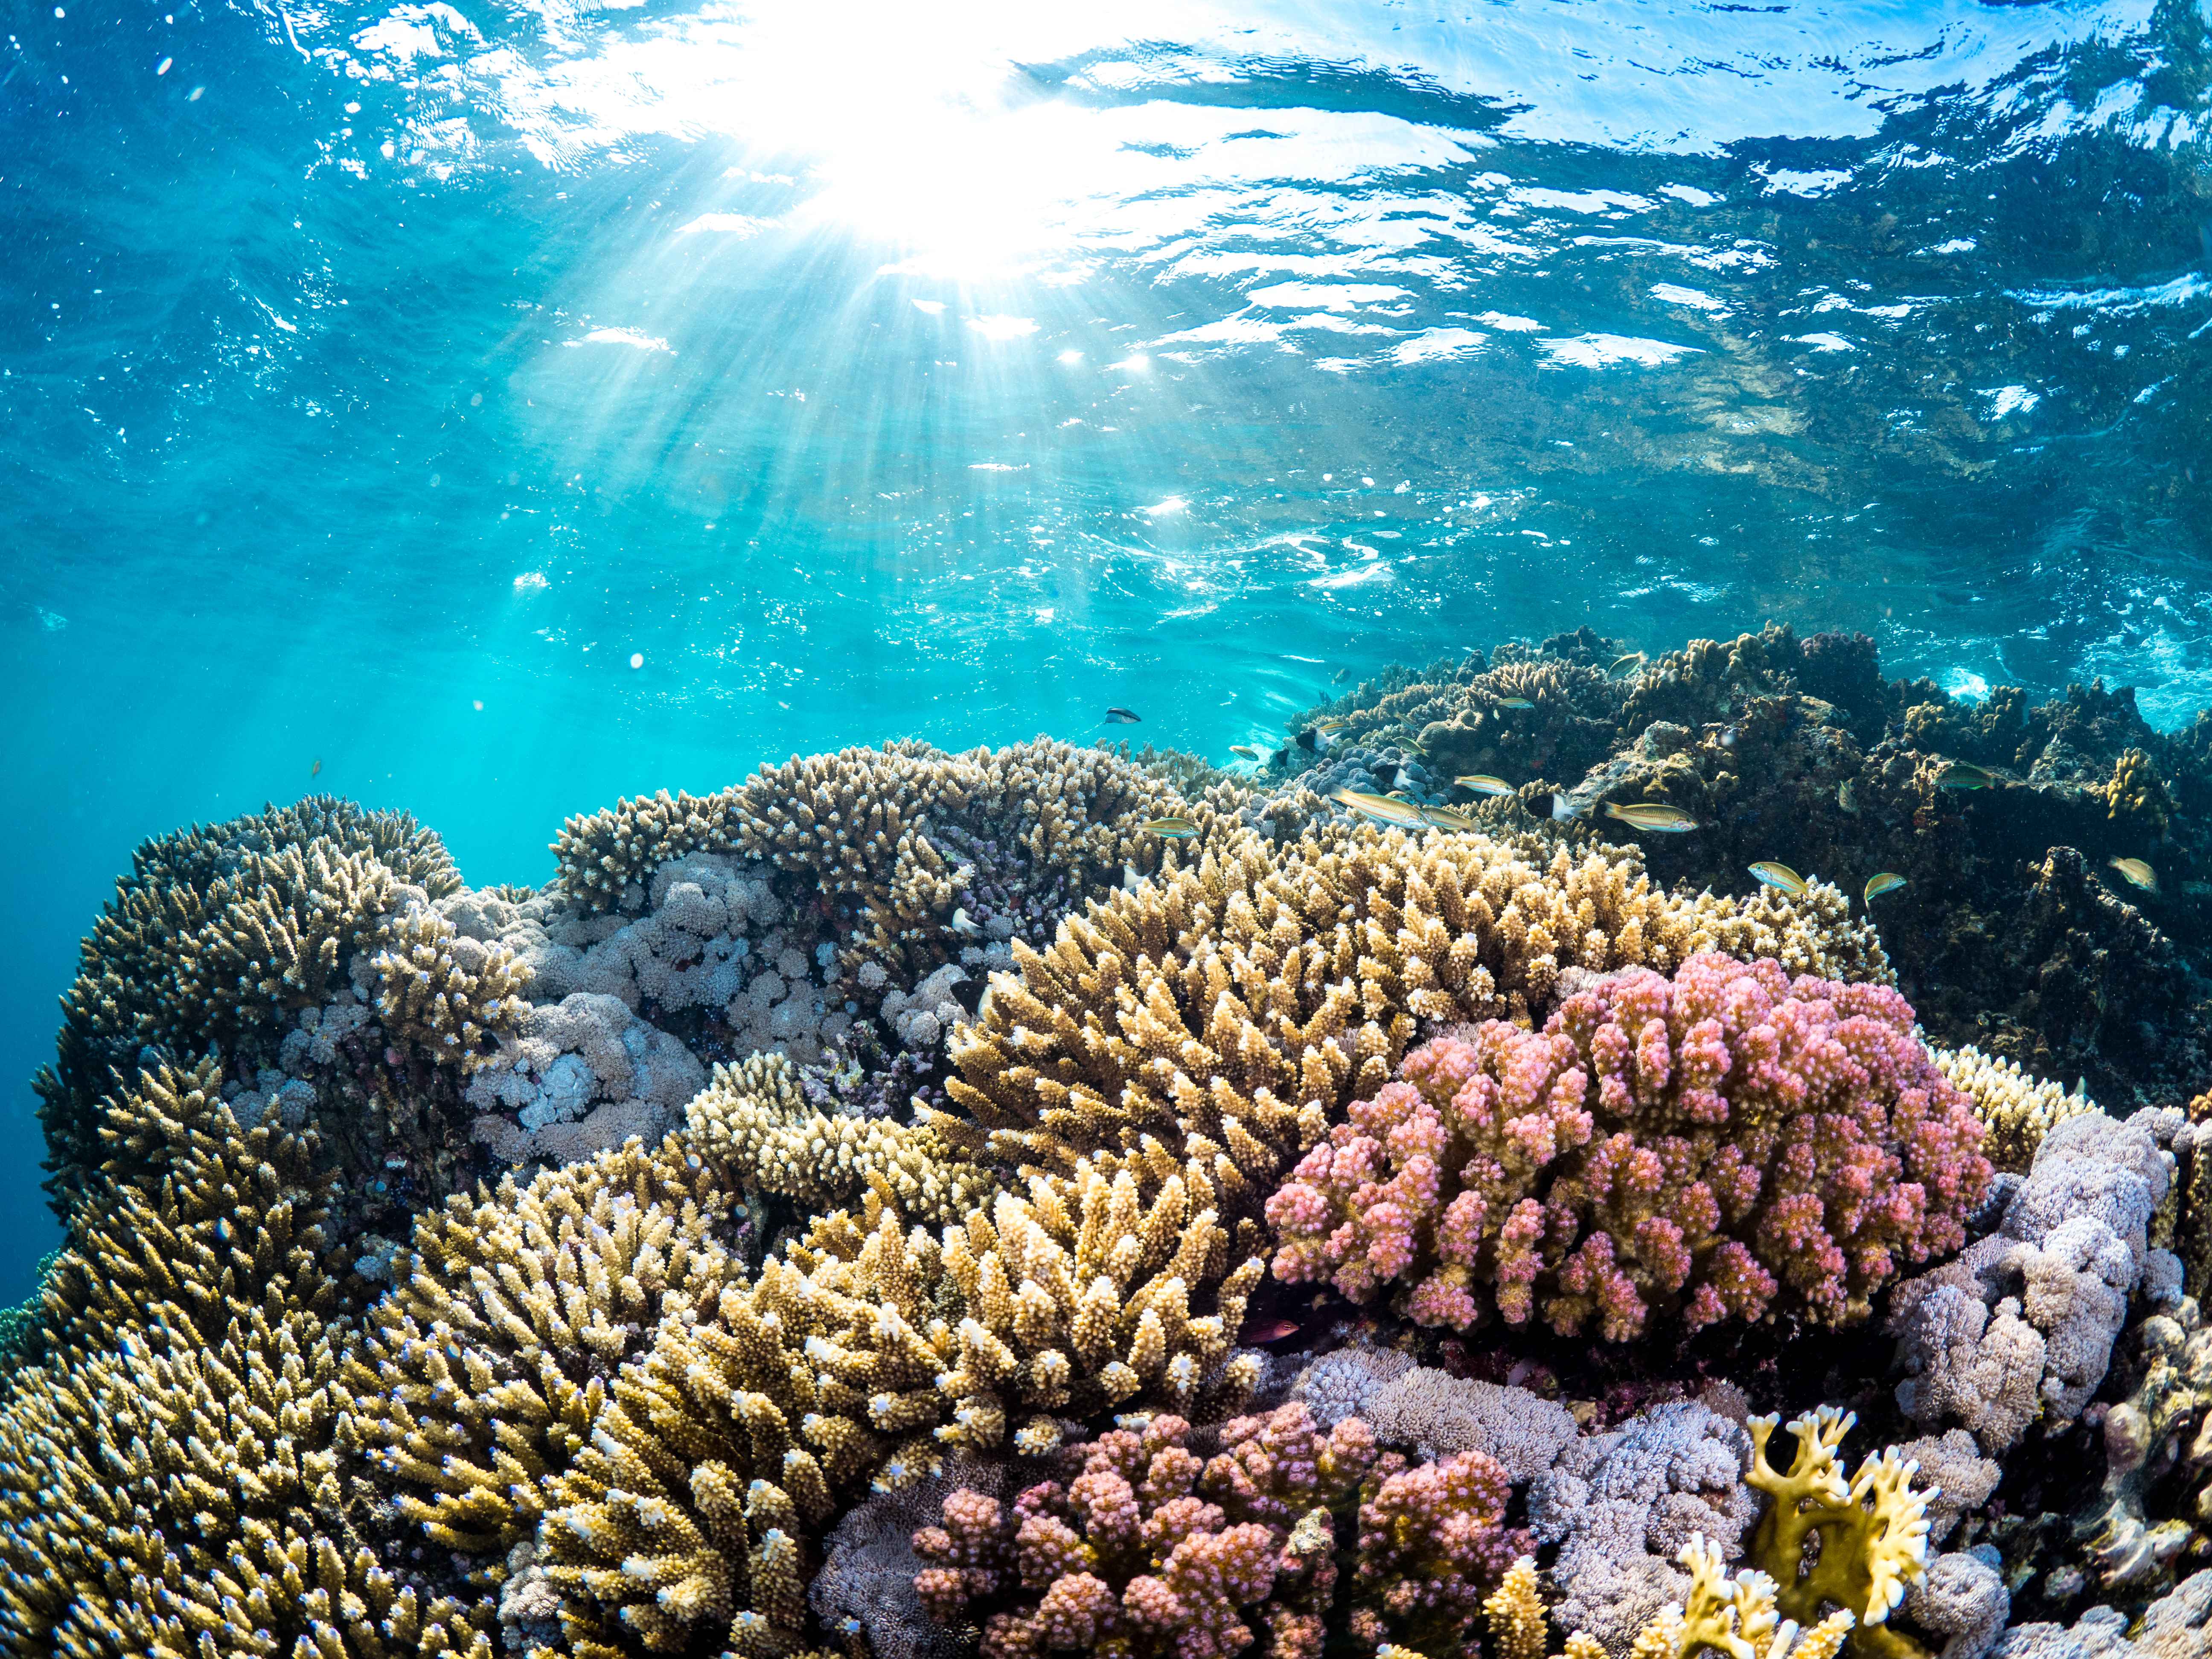  A thriving coral ecosystem features colorful and diverse corals in the Red Sea.